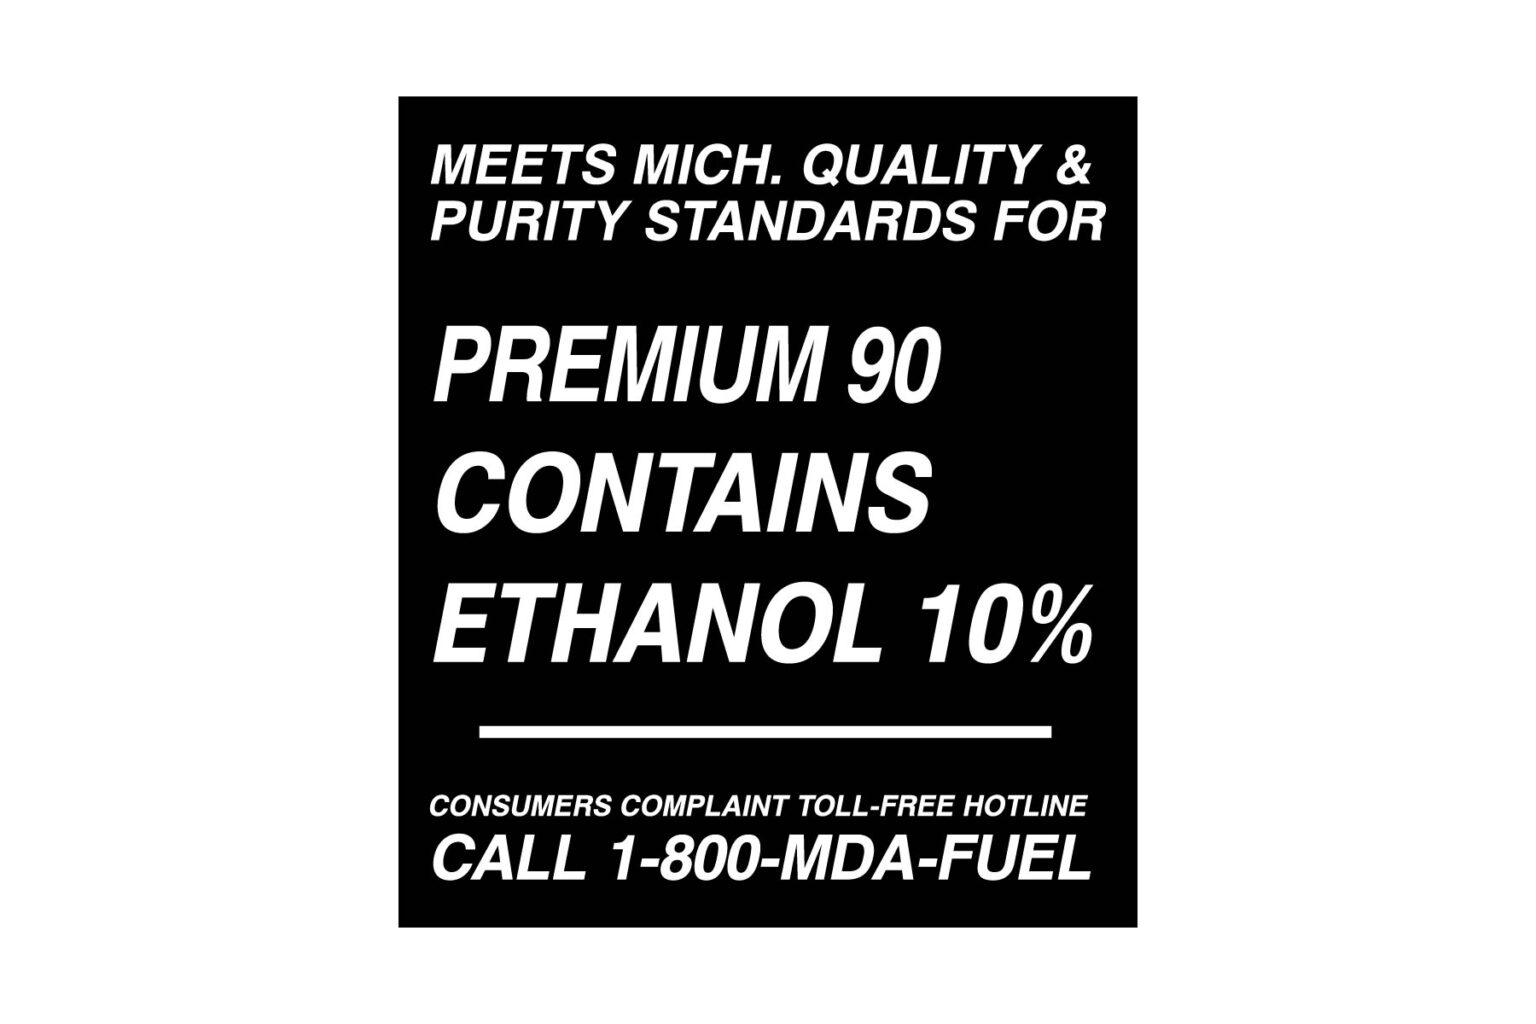 Meets Michigan Quality & Purity Standards for Premium 90 Contains Ethanol 10% Decal